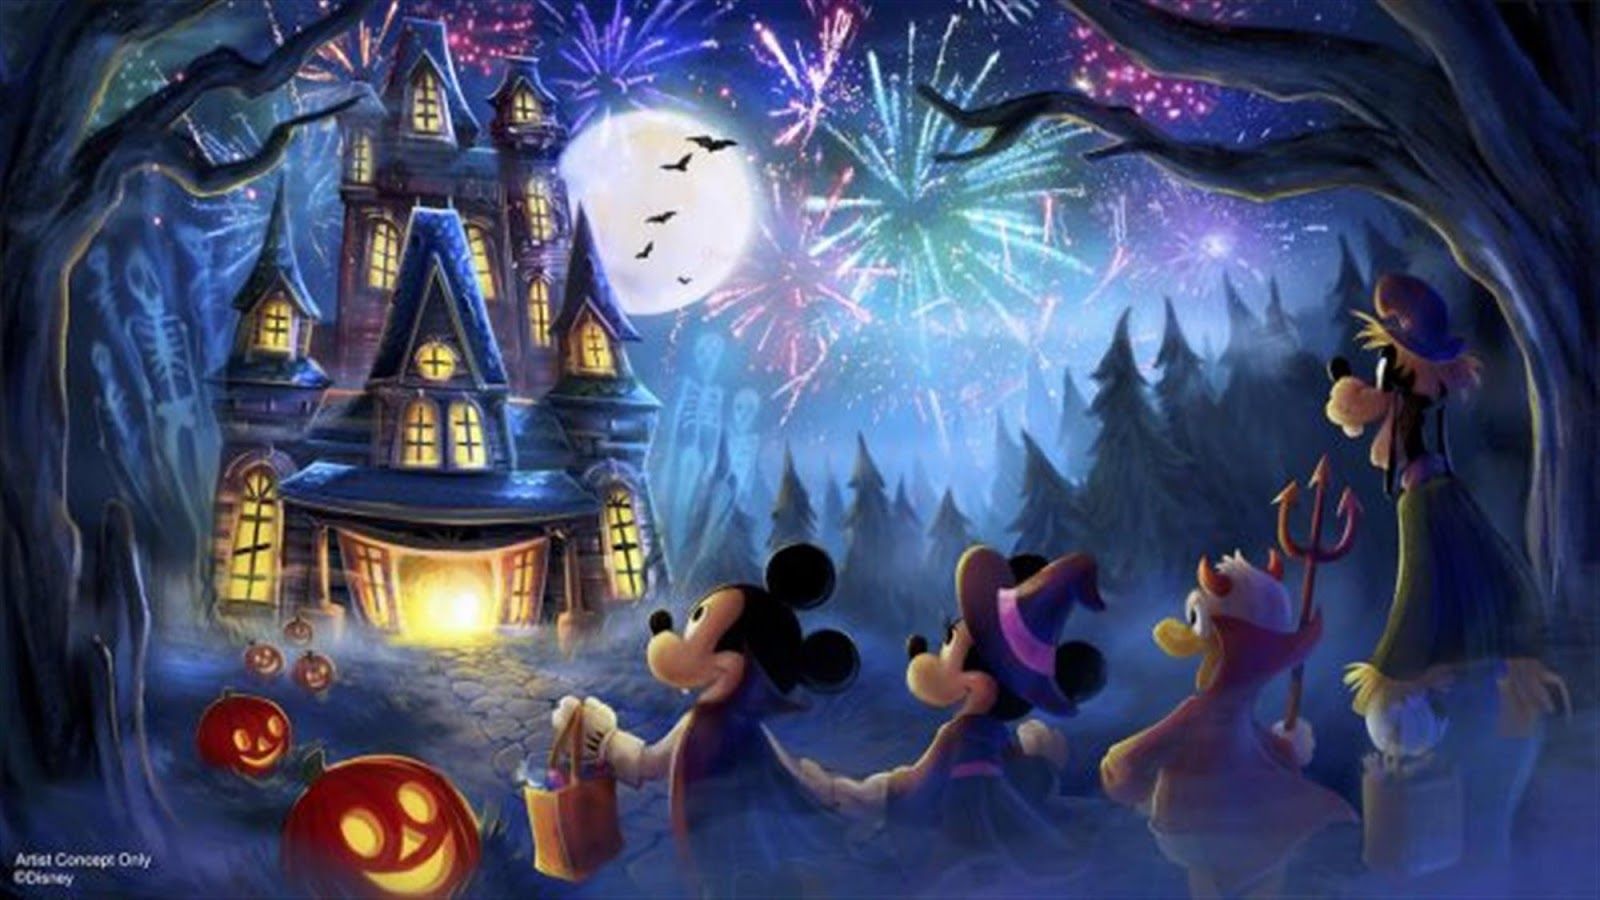 Disney's Not So Spooky Spectacular Debuts At Mickey's Not So Scary Halloween Party